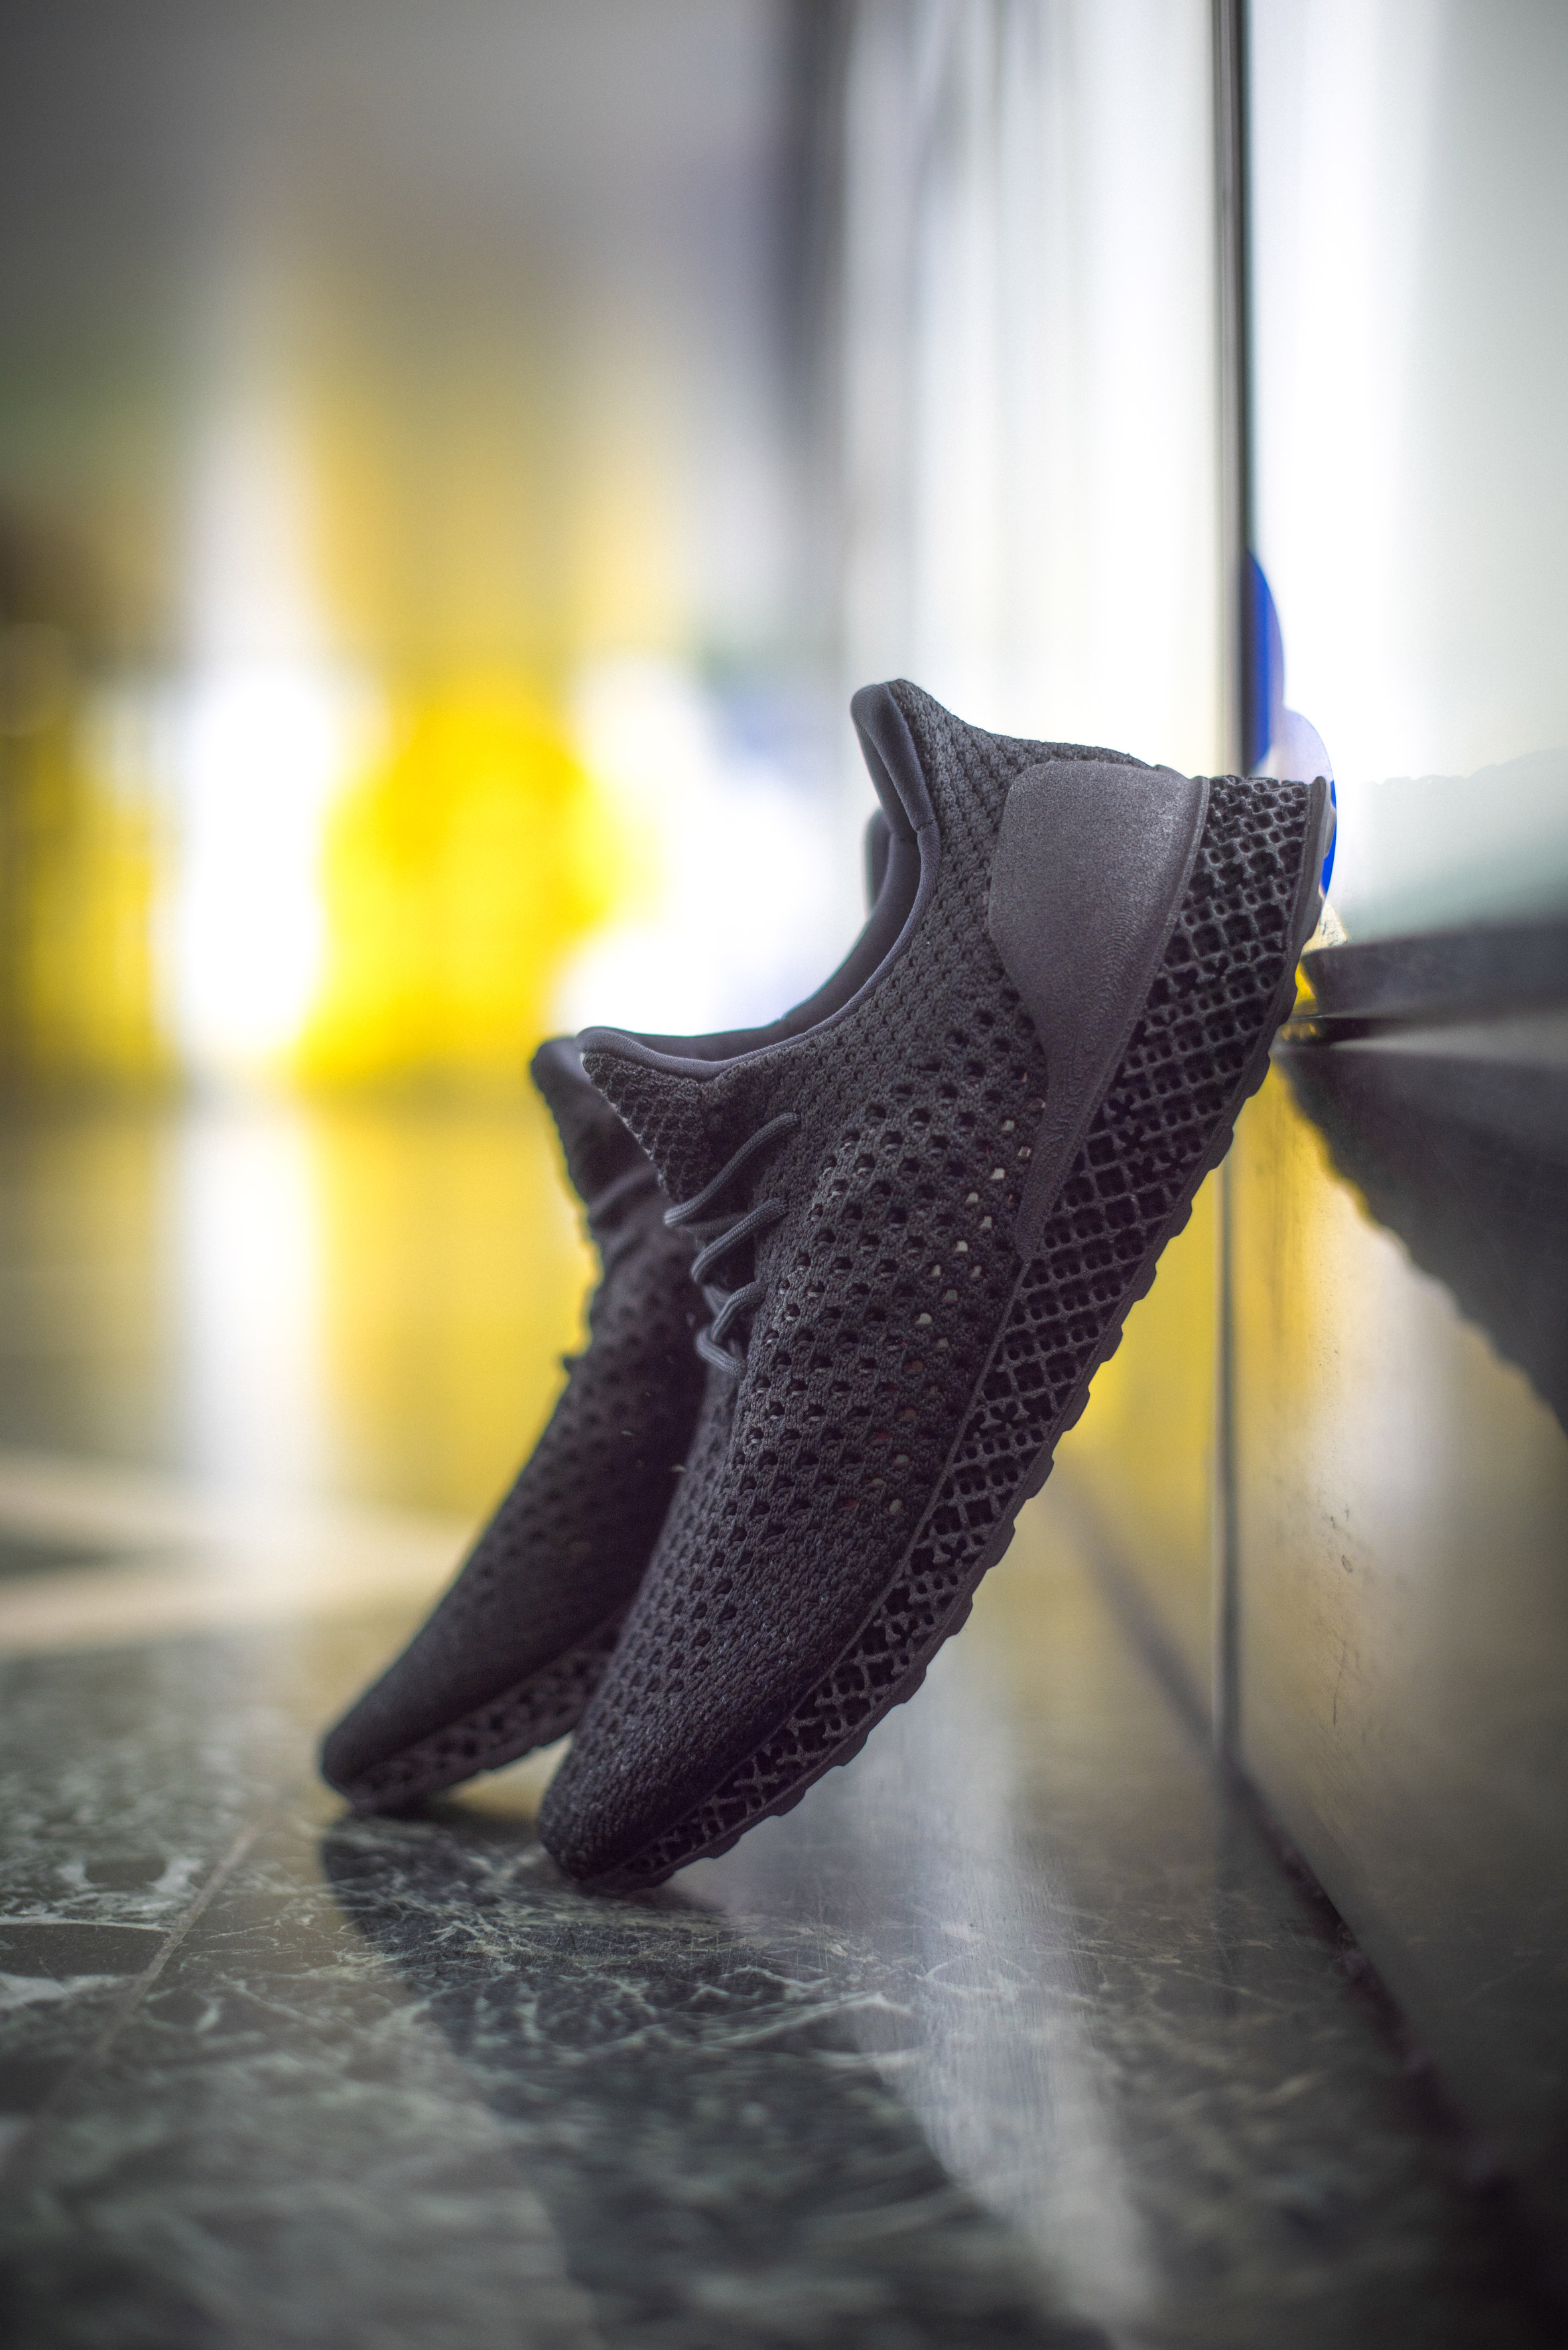 3D-printed Adidas trainers go on